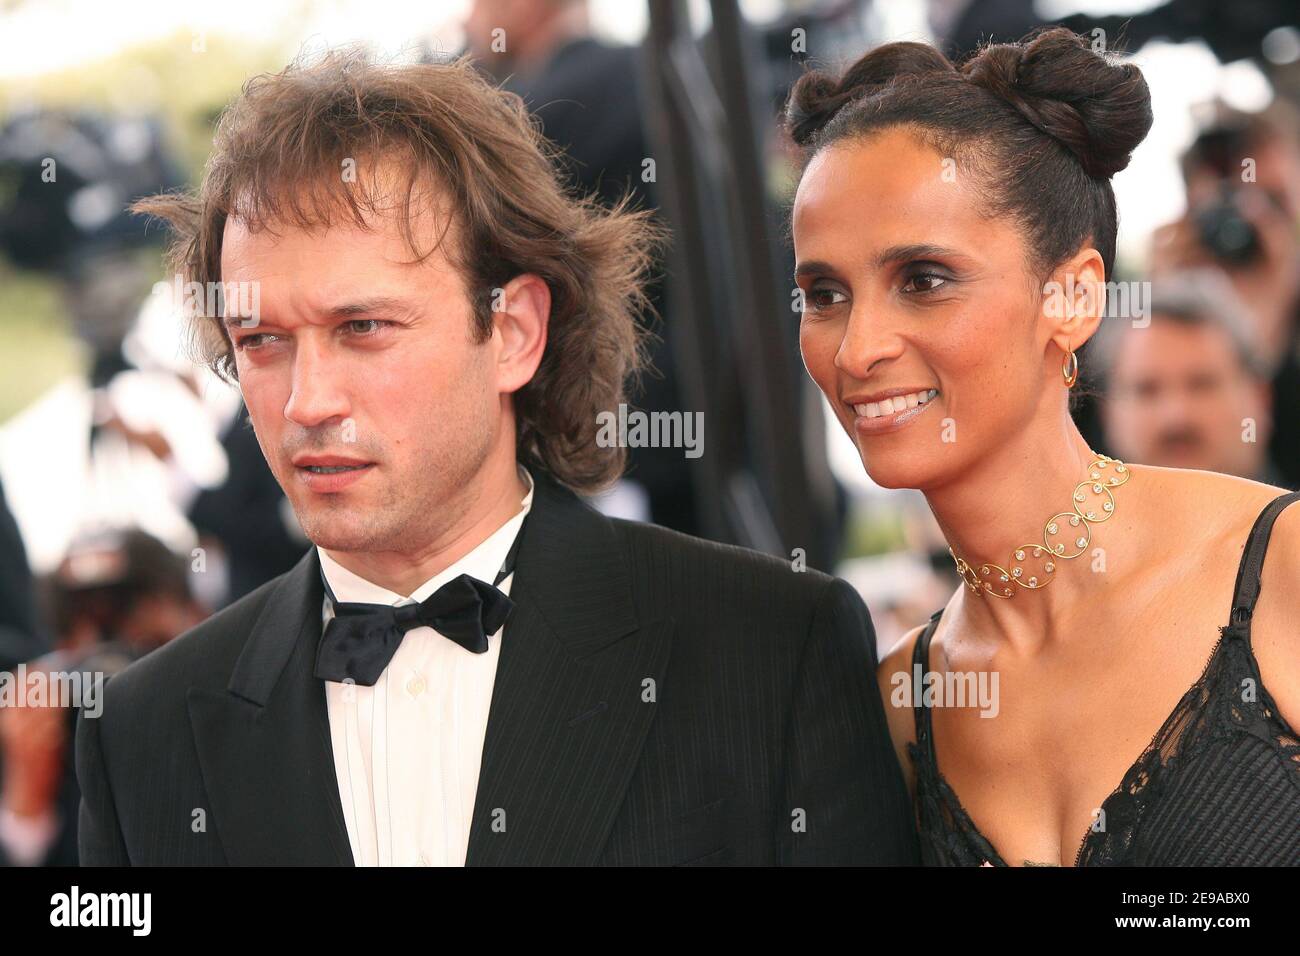 Swiss actor Vincent Perez and Karine Sylla walk the red carpet of the Palais des Festivals for the screening of French director Nicole Garcia's movie 'Selon Charlie' in competition for the 59th Film Festival of Cannes on May 20, 2006. Photo by Hahn-Nebinger-Orban/ABACAUSA.COM Stock Photo